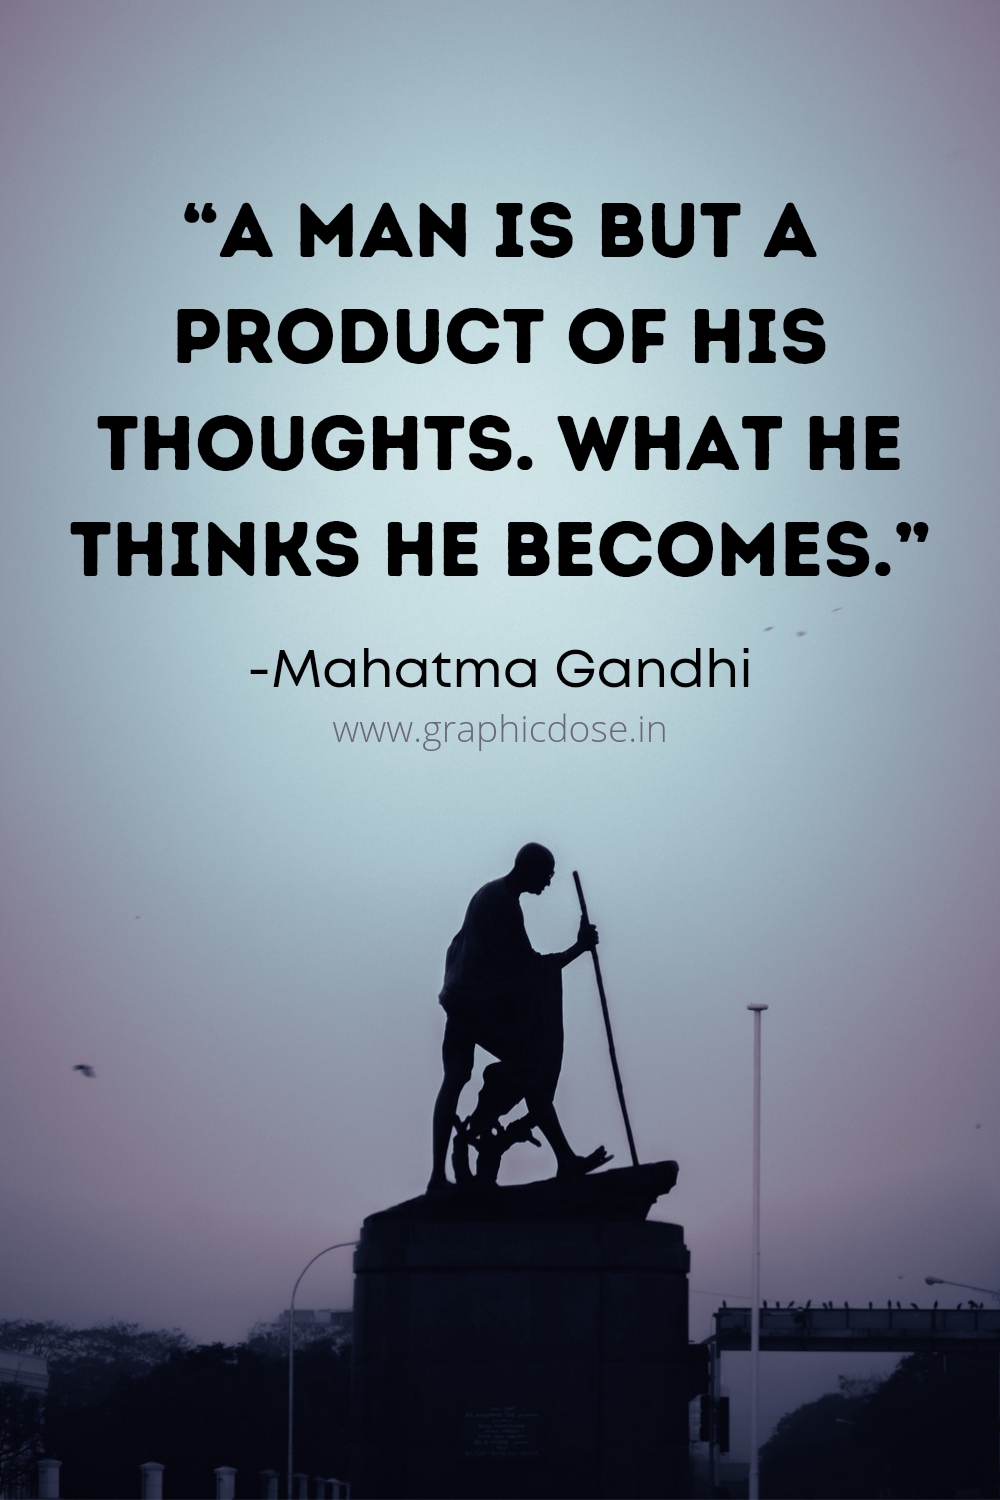 Mahatma Gandhi's Quote Product of his thoughts